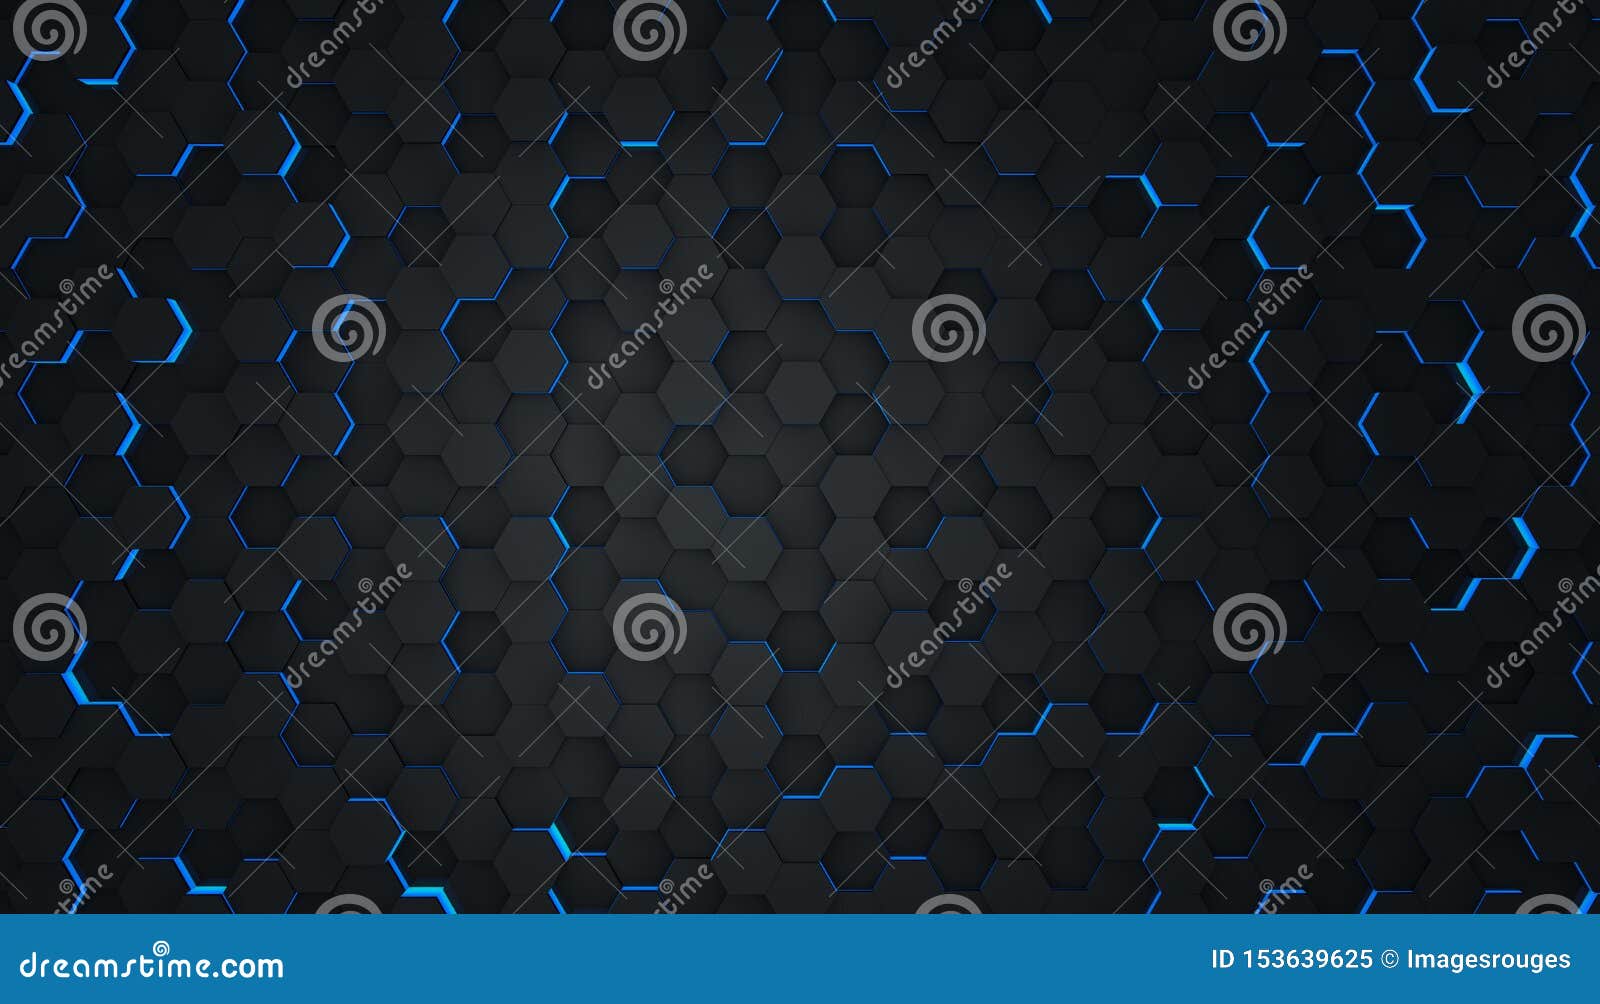 clear pattern abstract background hexagon black and blue, wallpaper futuristic